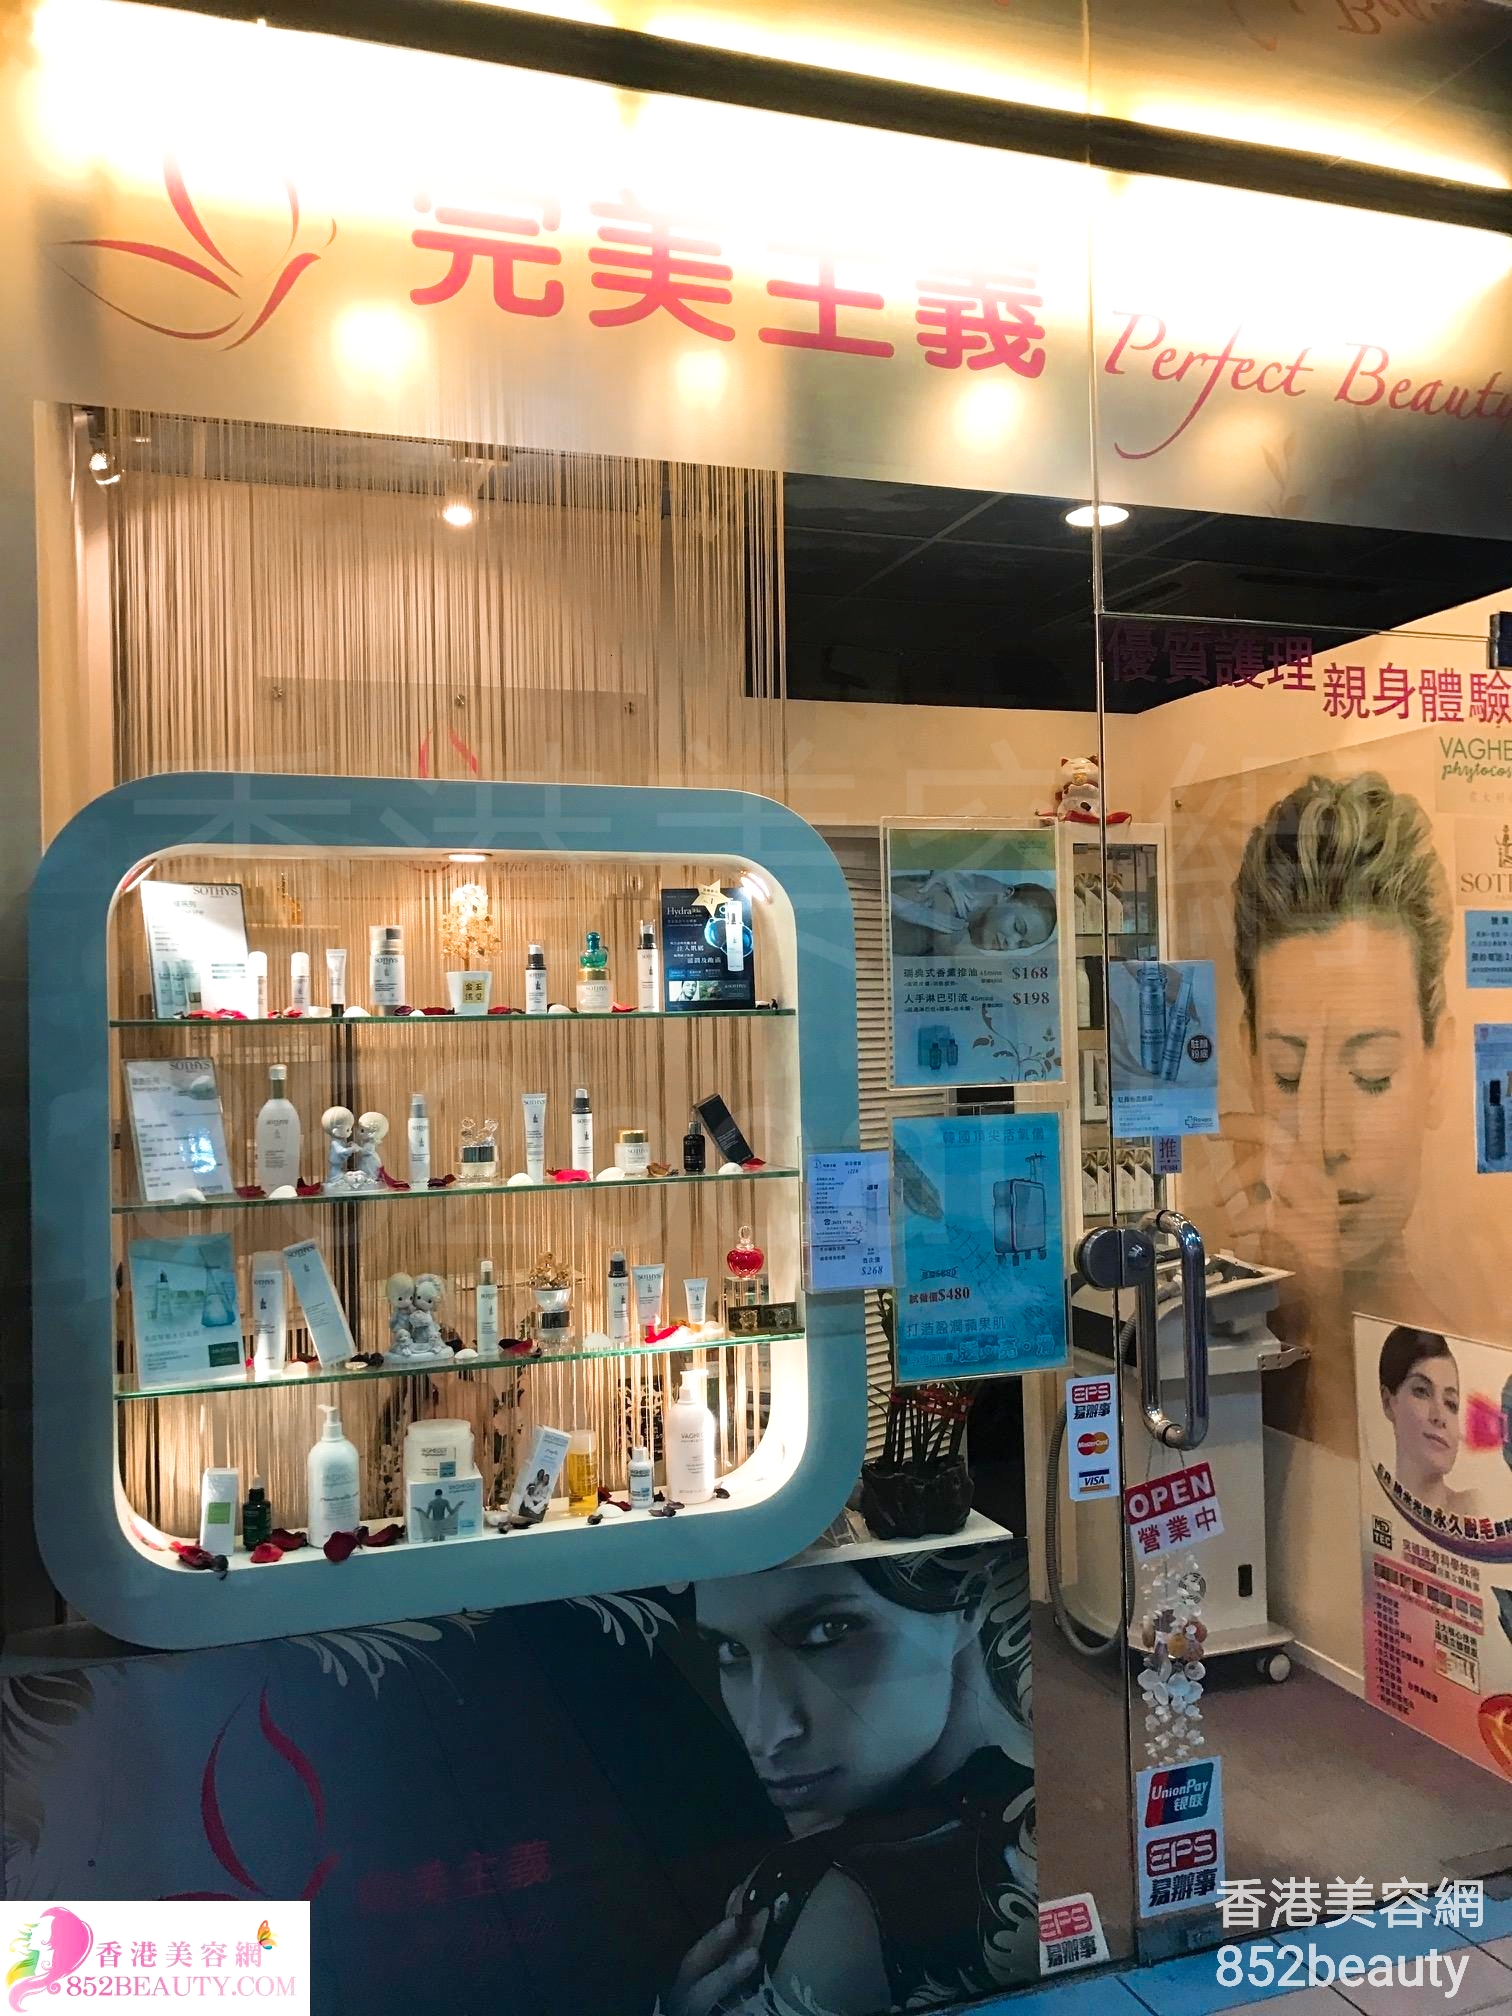 Hand and foot care: 完美主義 Perfect Beauty